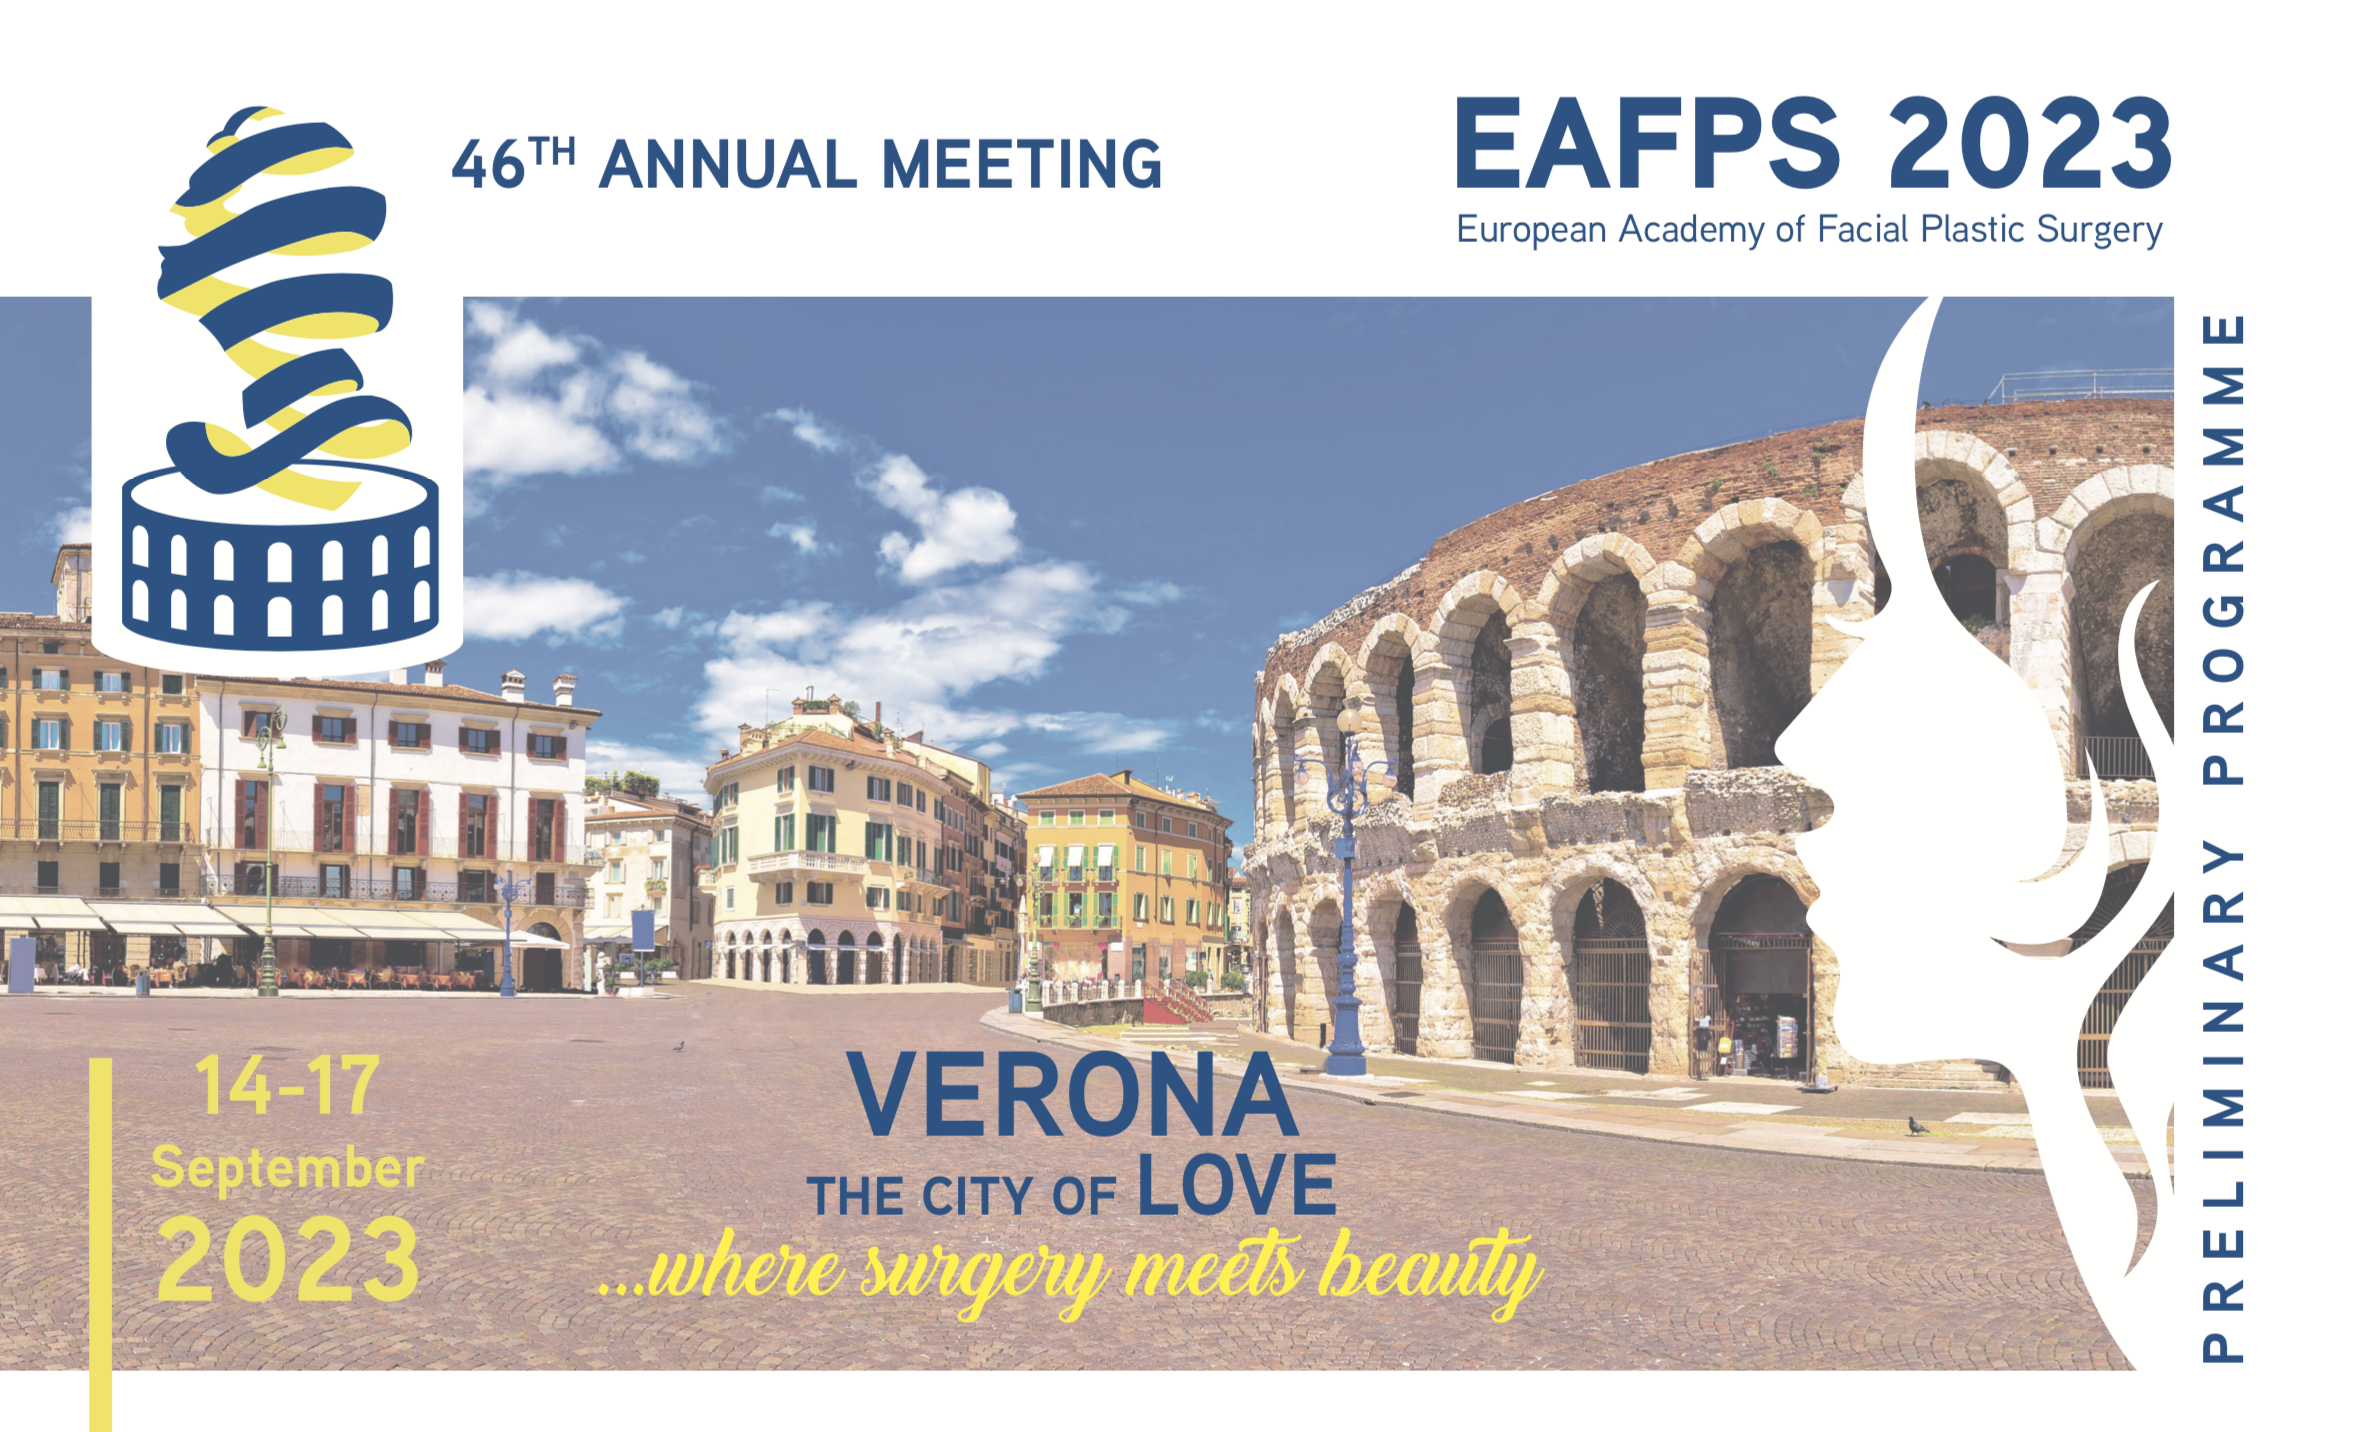 46th Annual Meetinf of the European Academy of Facial Plastic Surgery - EAFPS 2023